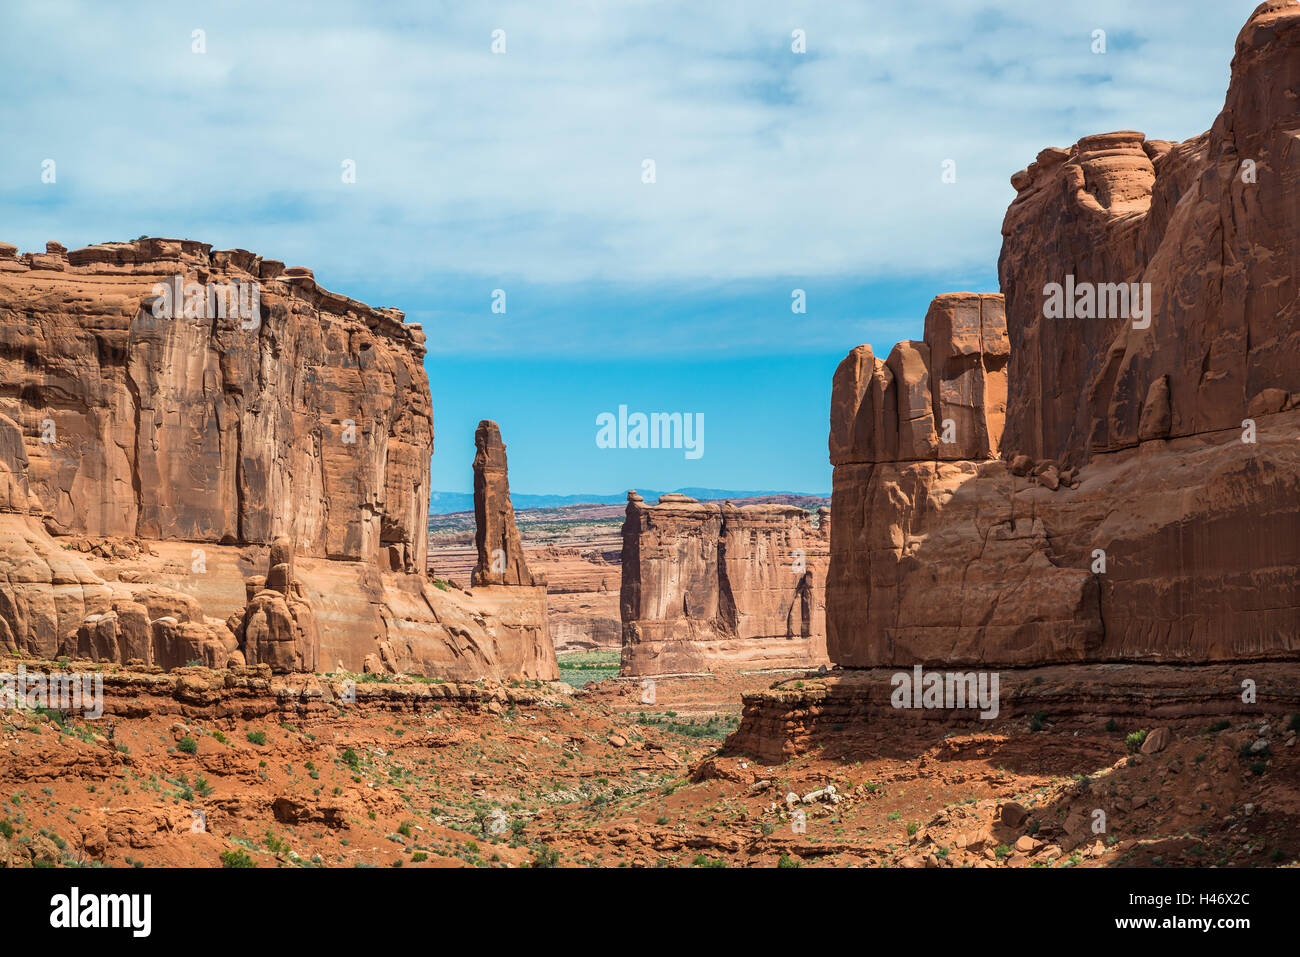 Courthouse Towers, Arches National Park, Utah, USA Banque D'Images